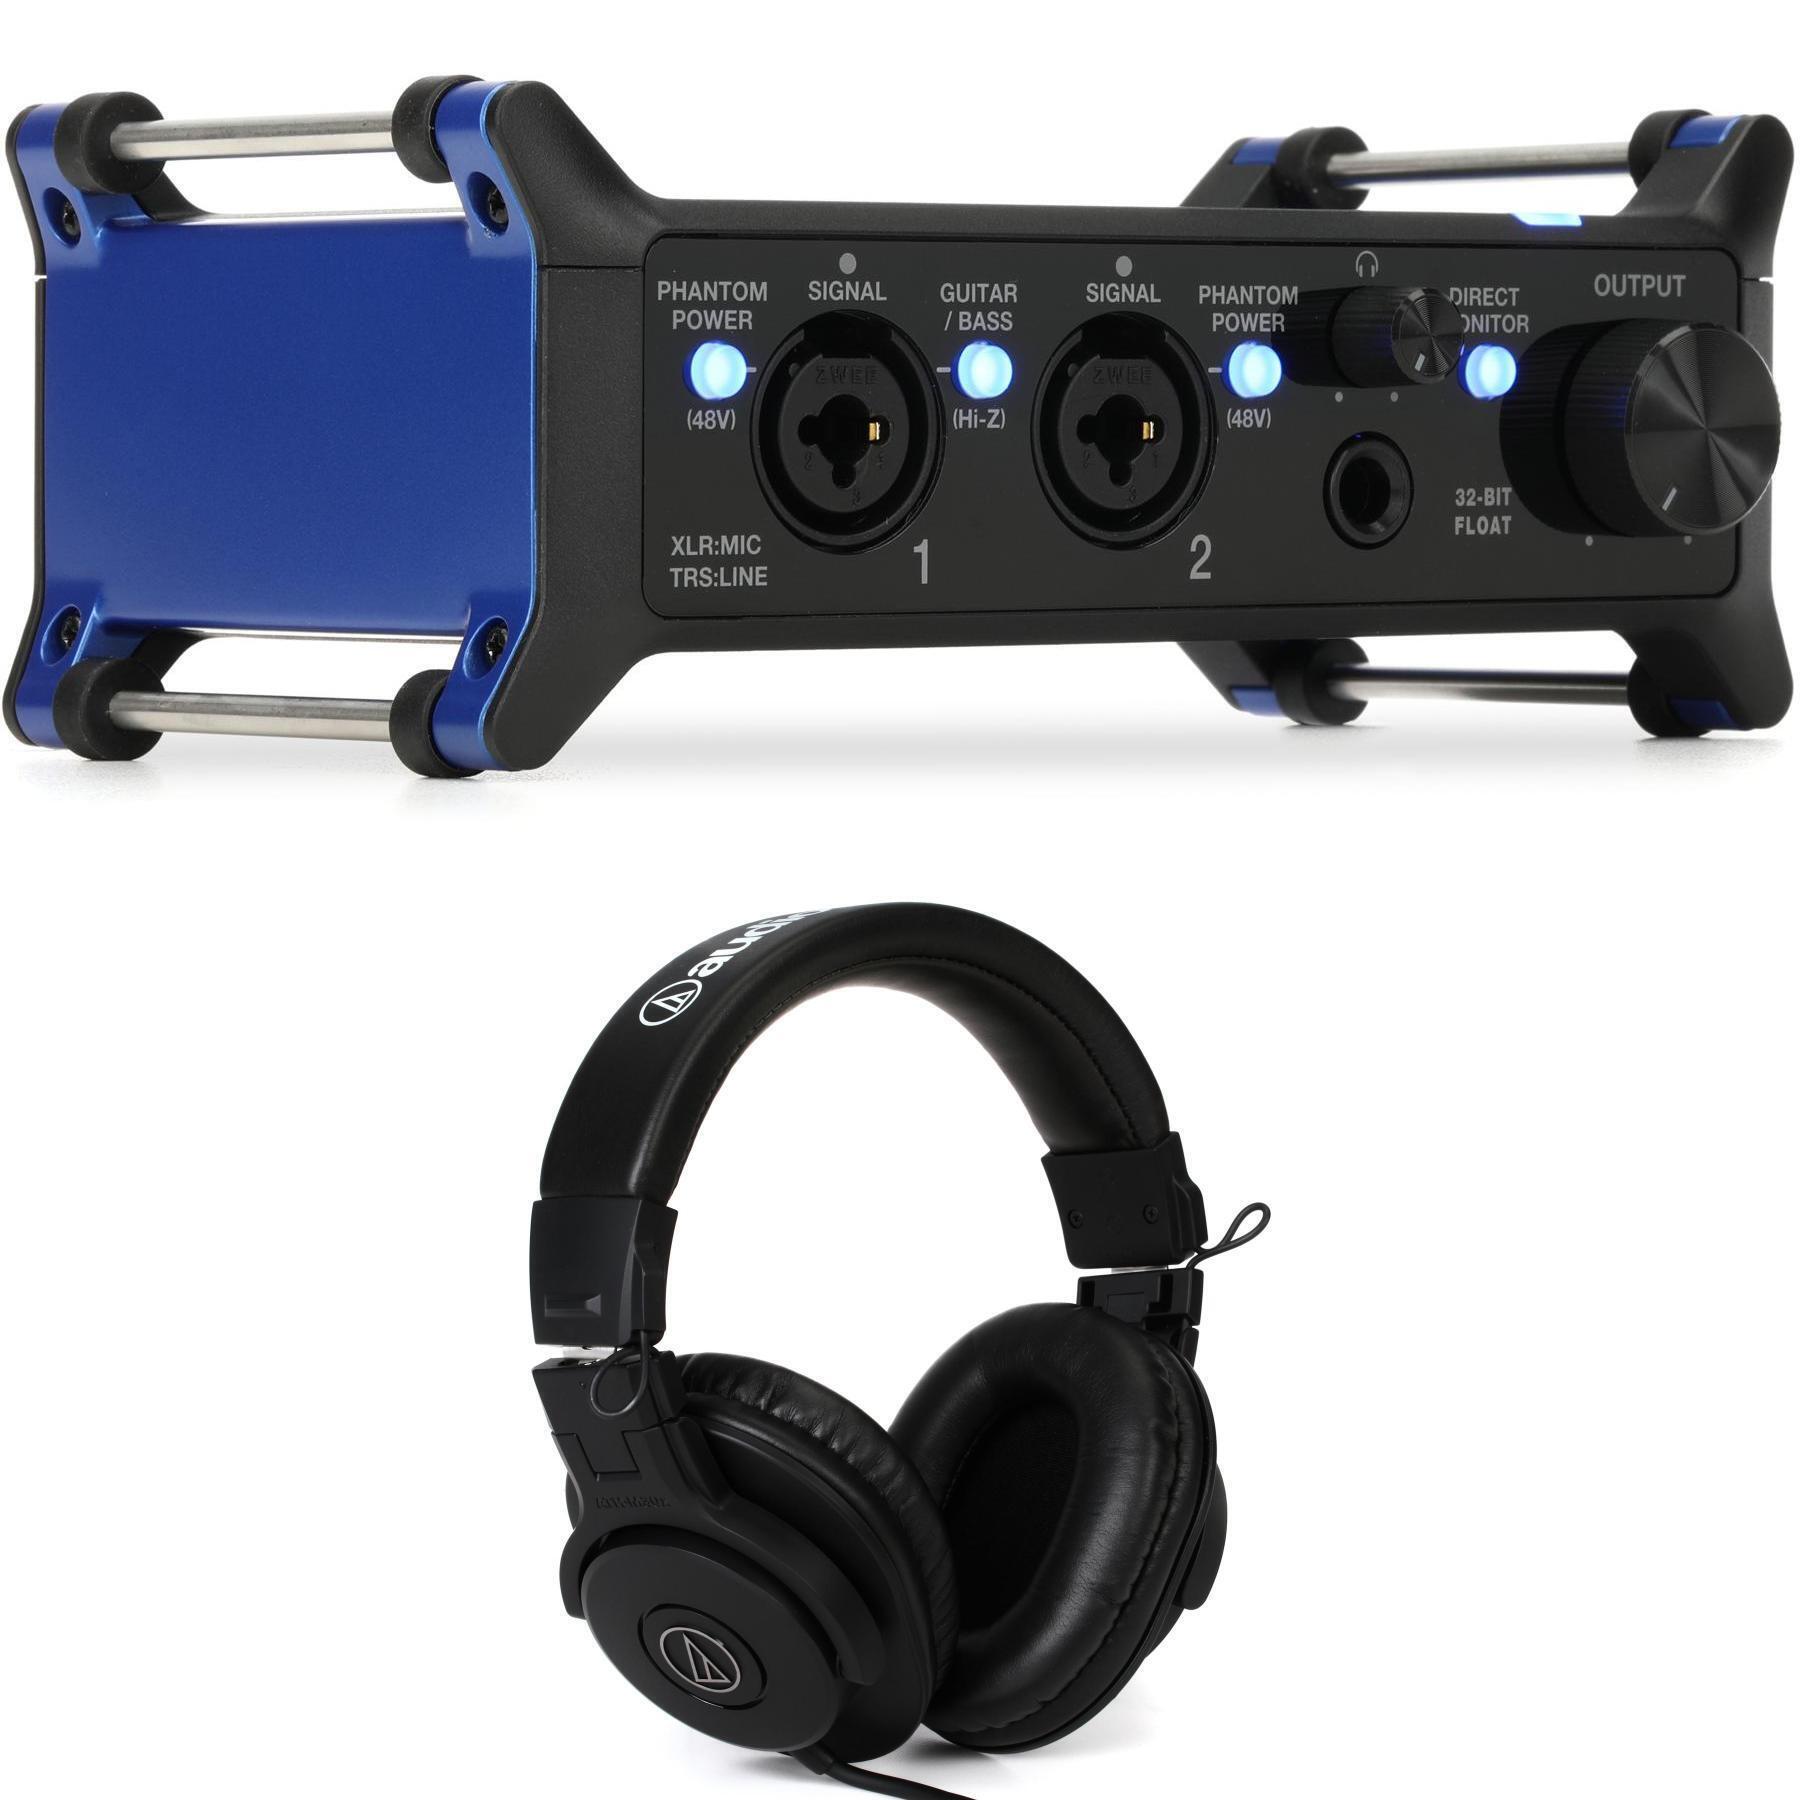 Zoom UAC-232 USB 2.0 Audio Interface and Headphones | Sweetwater